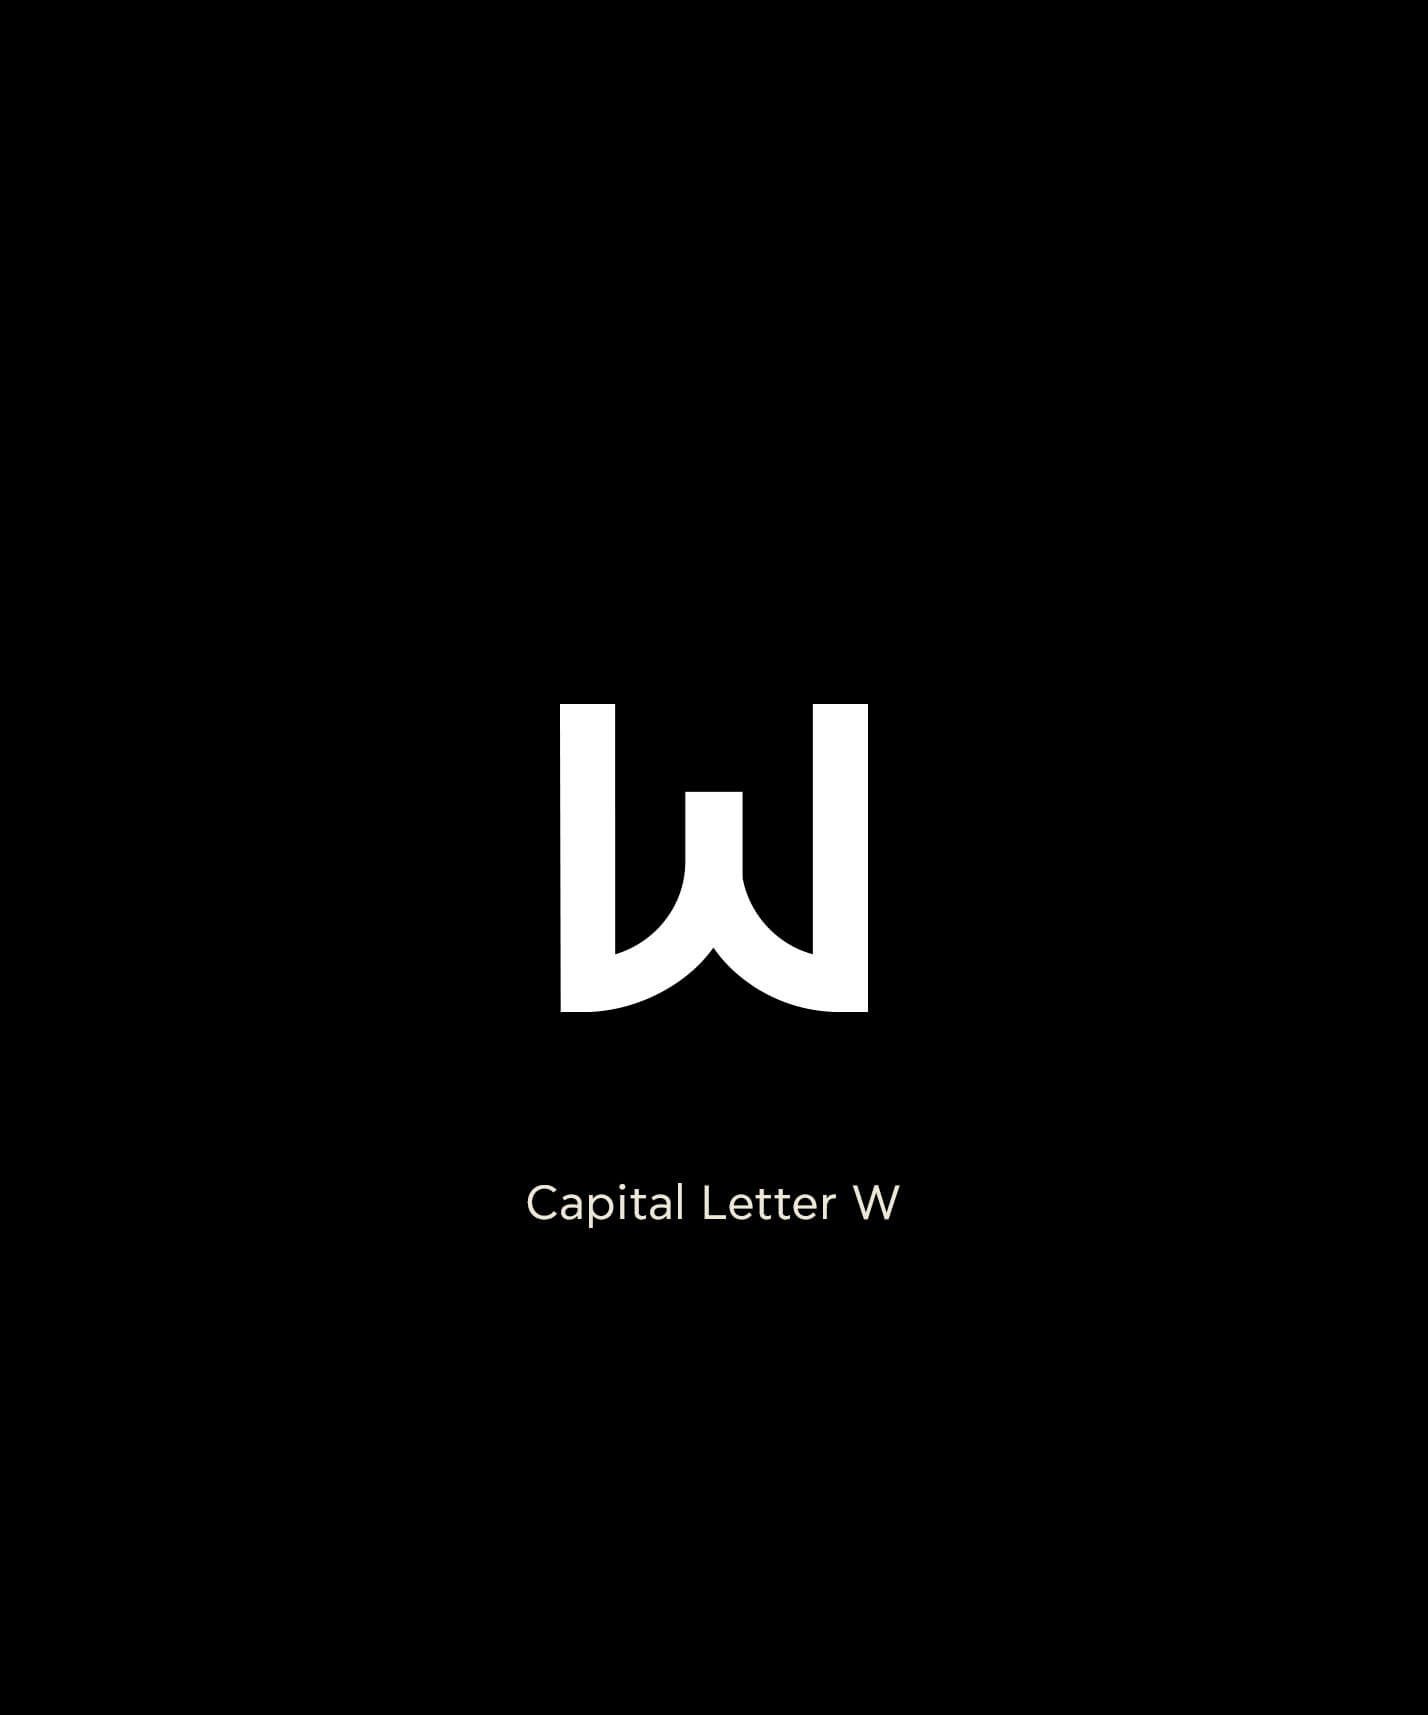 Initial Letter W Logo Inspiration Moodboard Capital Letter